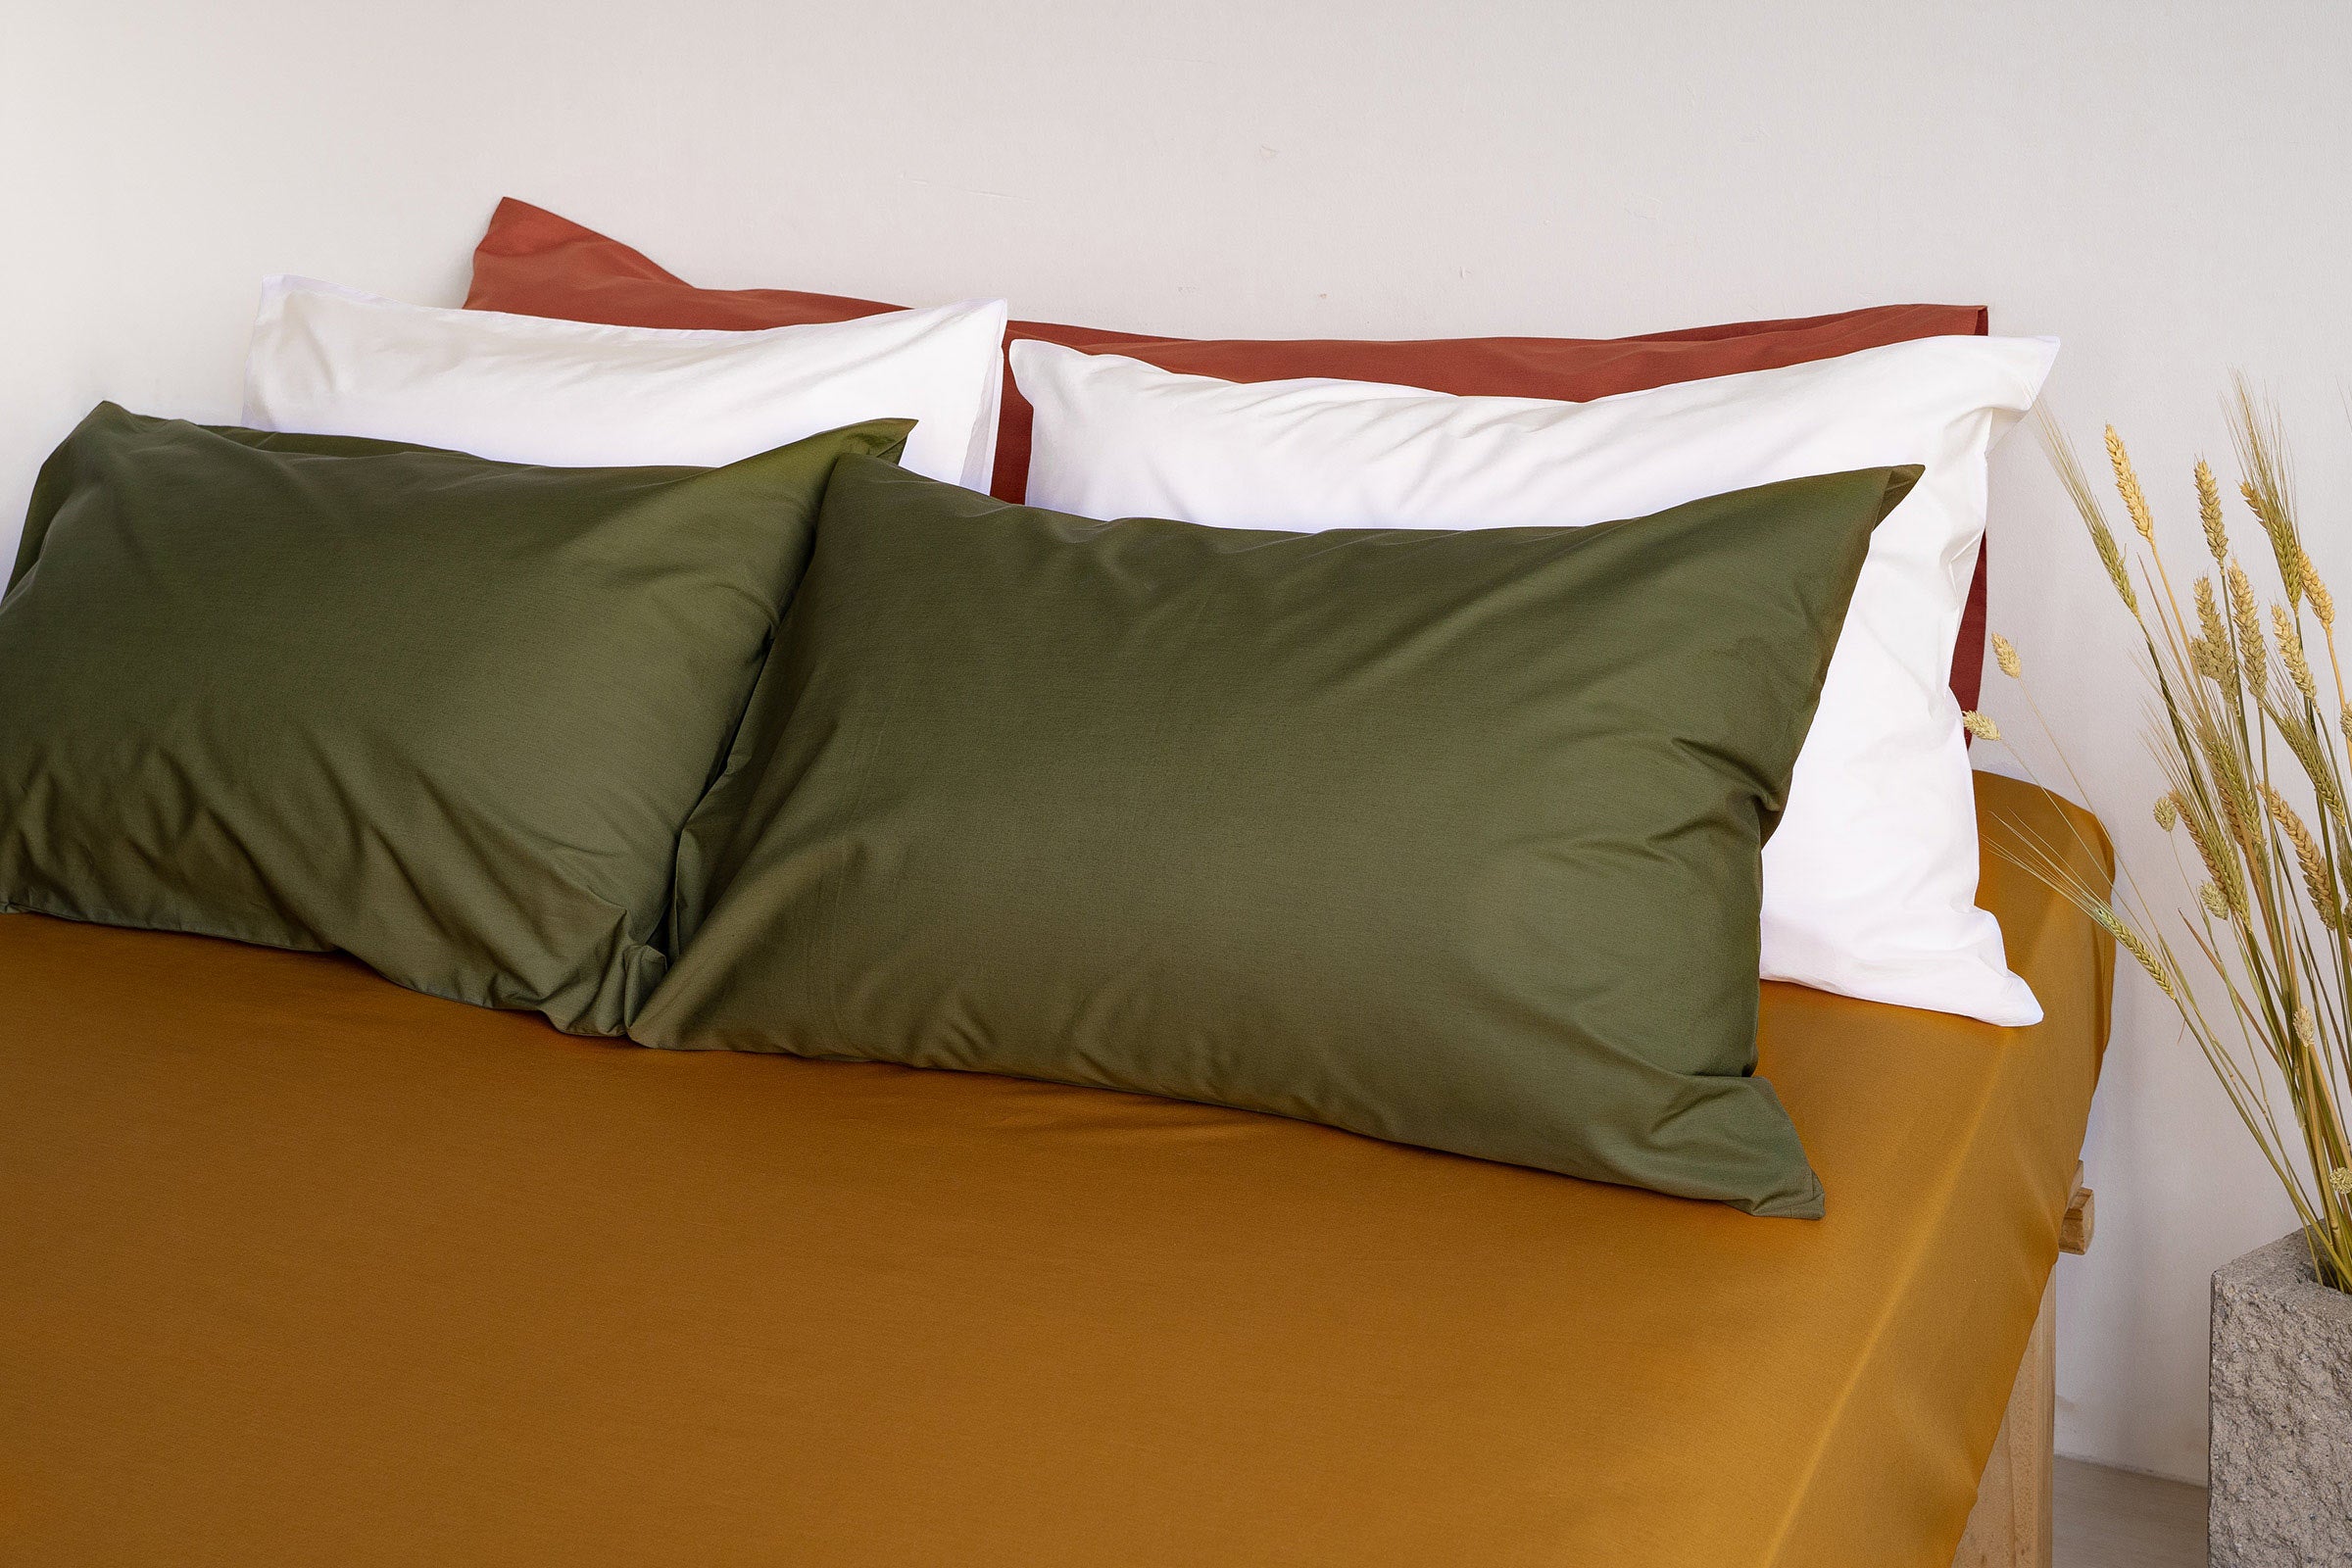 crisp-mustard-fitted-sheet-olive-white-pillowcase-pair-clay-body-pillow-by-sojao.jpg